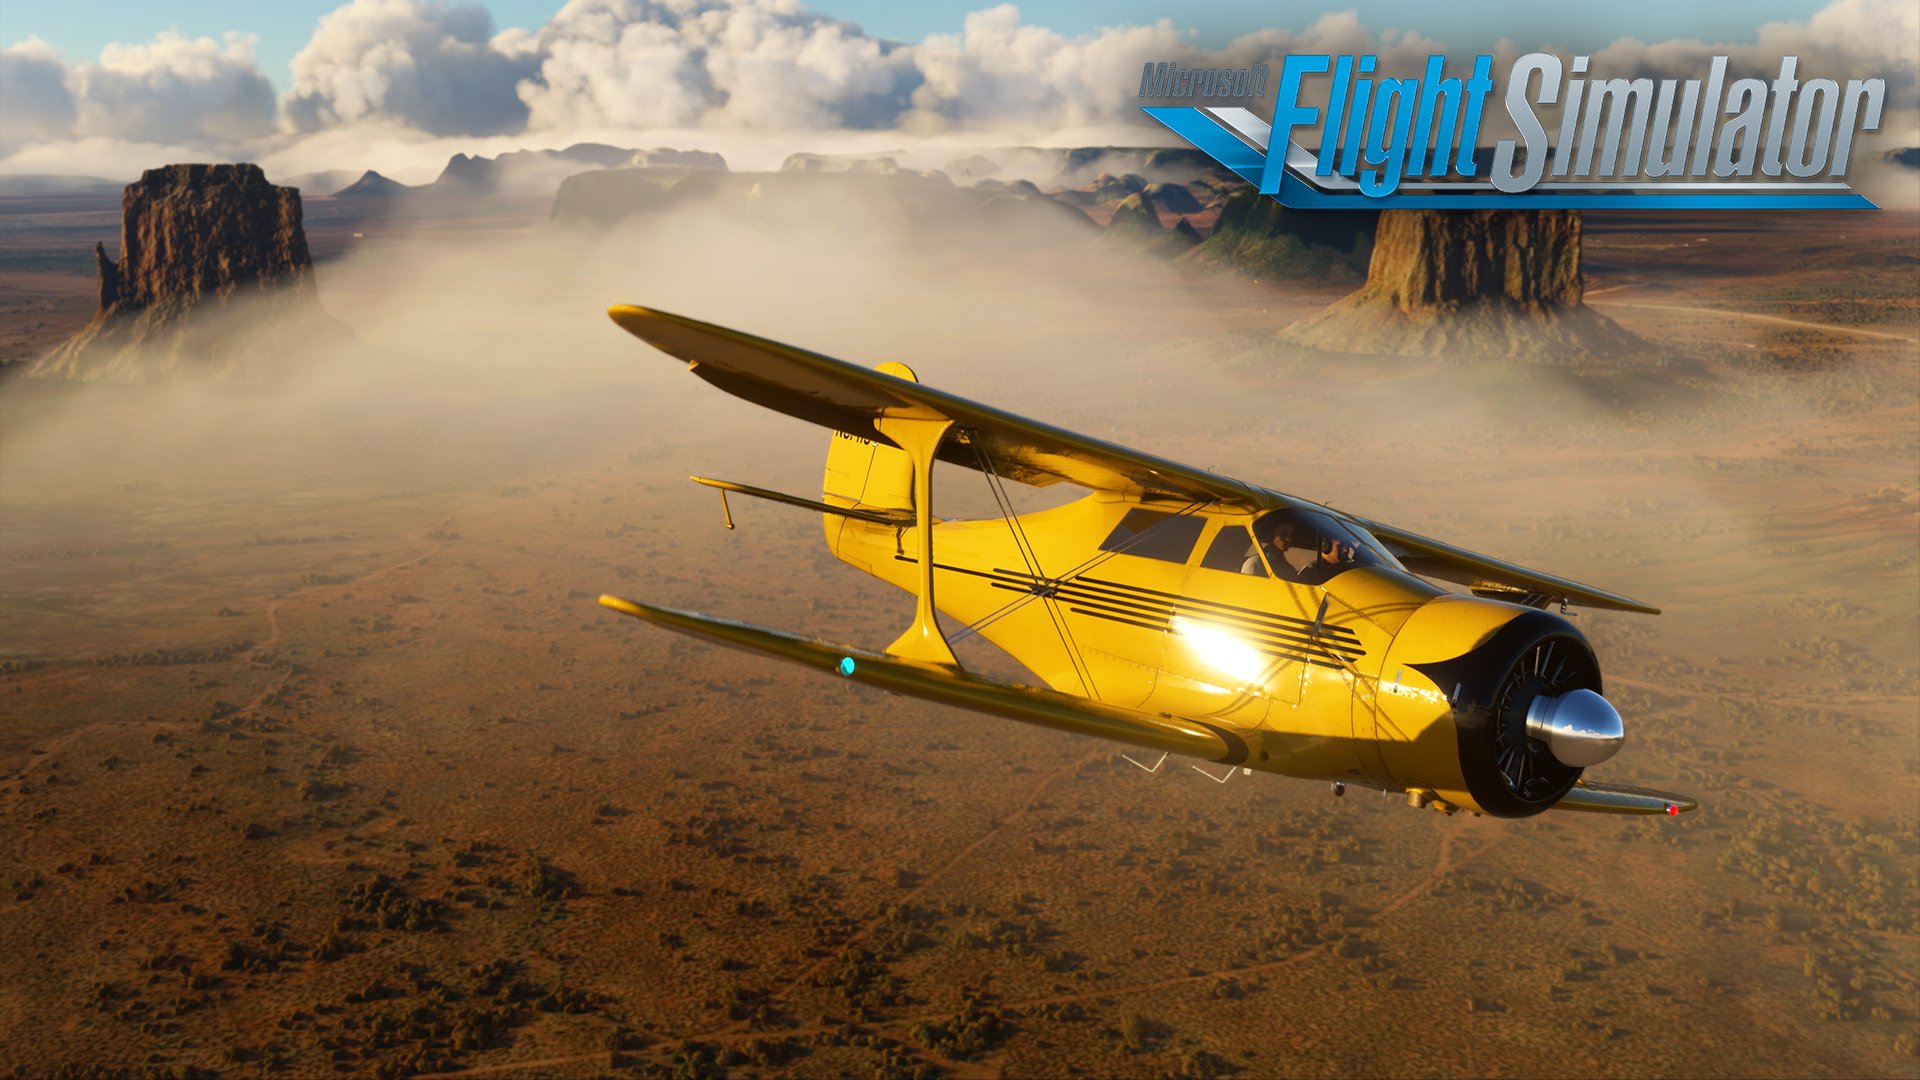 Video For Microsoft Flight Simulator Releases the Beechcraft Model 17 Staggerwing as Inaugural Offering of the new “Famous Flyers” Series